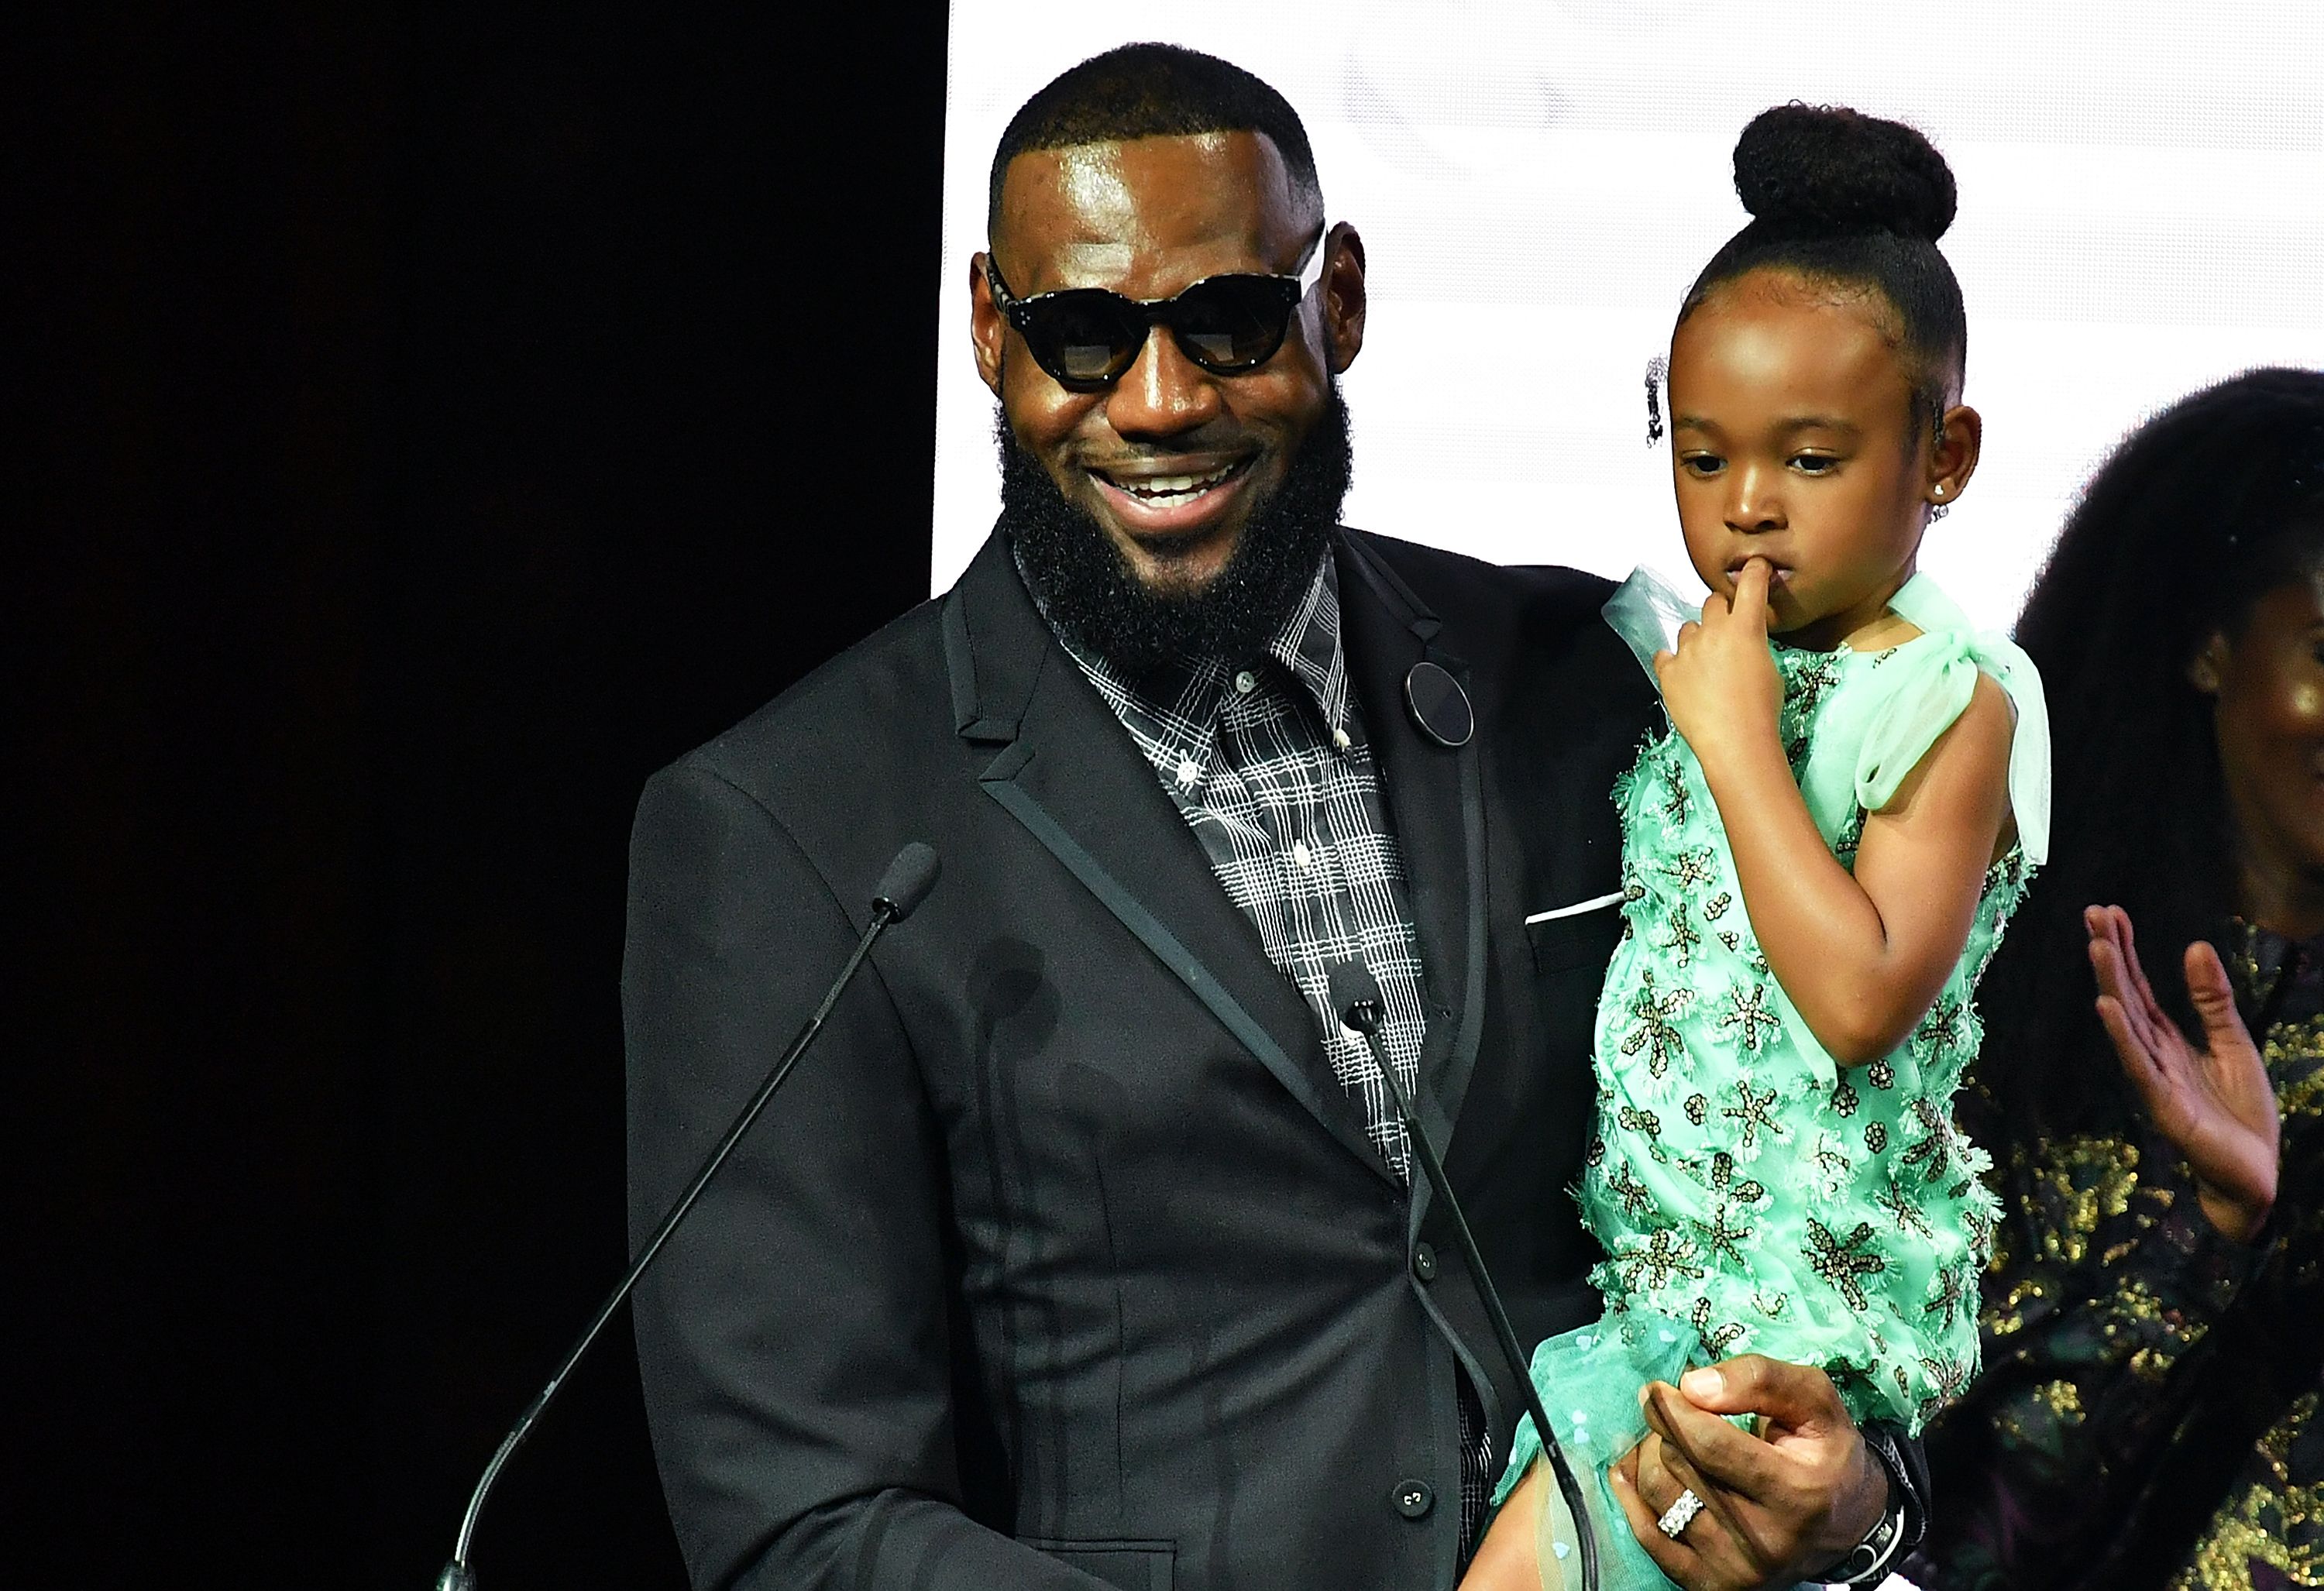 LeBron James, recepient of Icon 360 Award and daughter Zhuri James attend Harlem's Fashion Row during New York Fahion Week at Capitale on September 4, 2018. | Photo: Getty Images